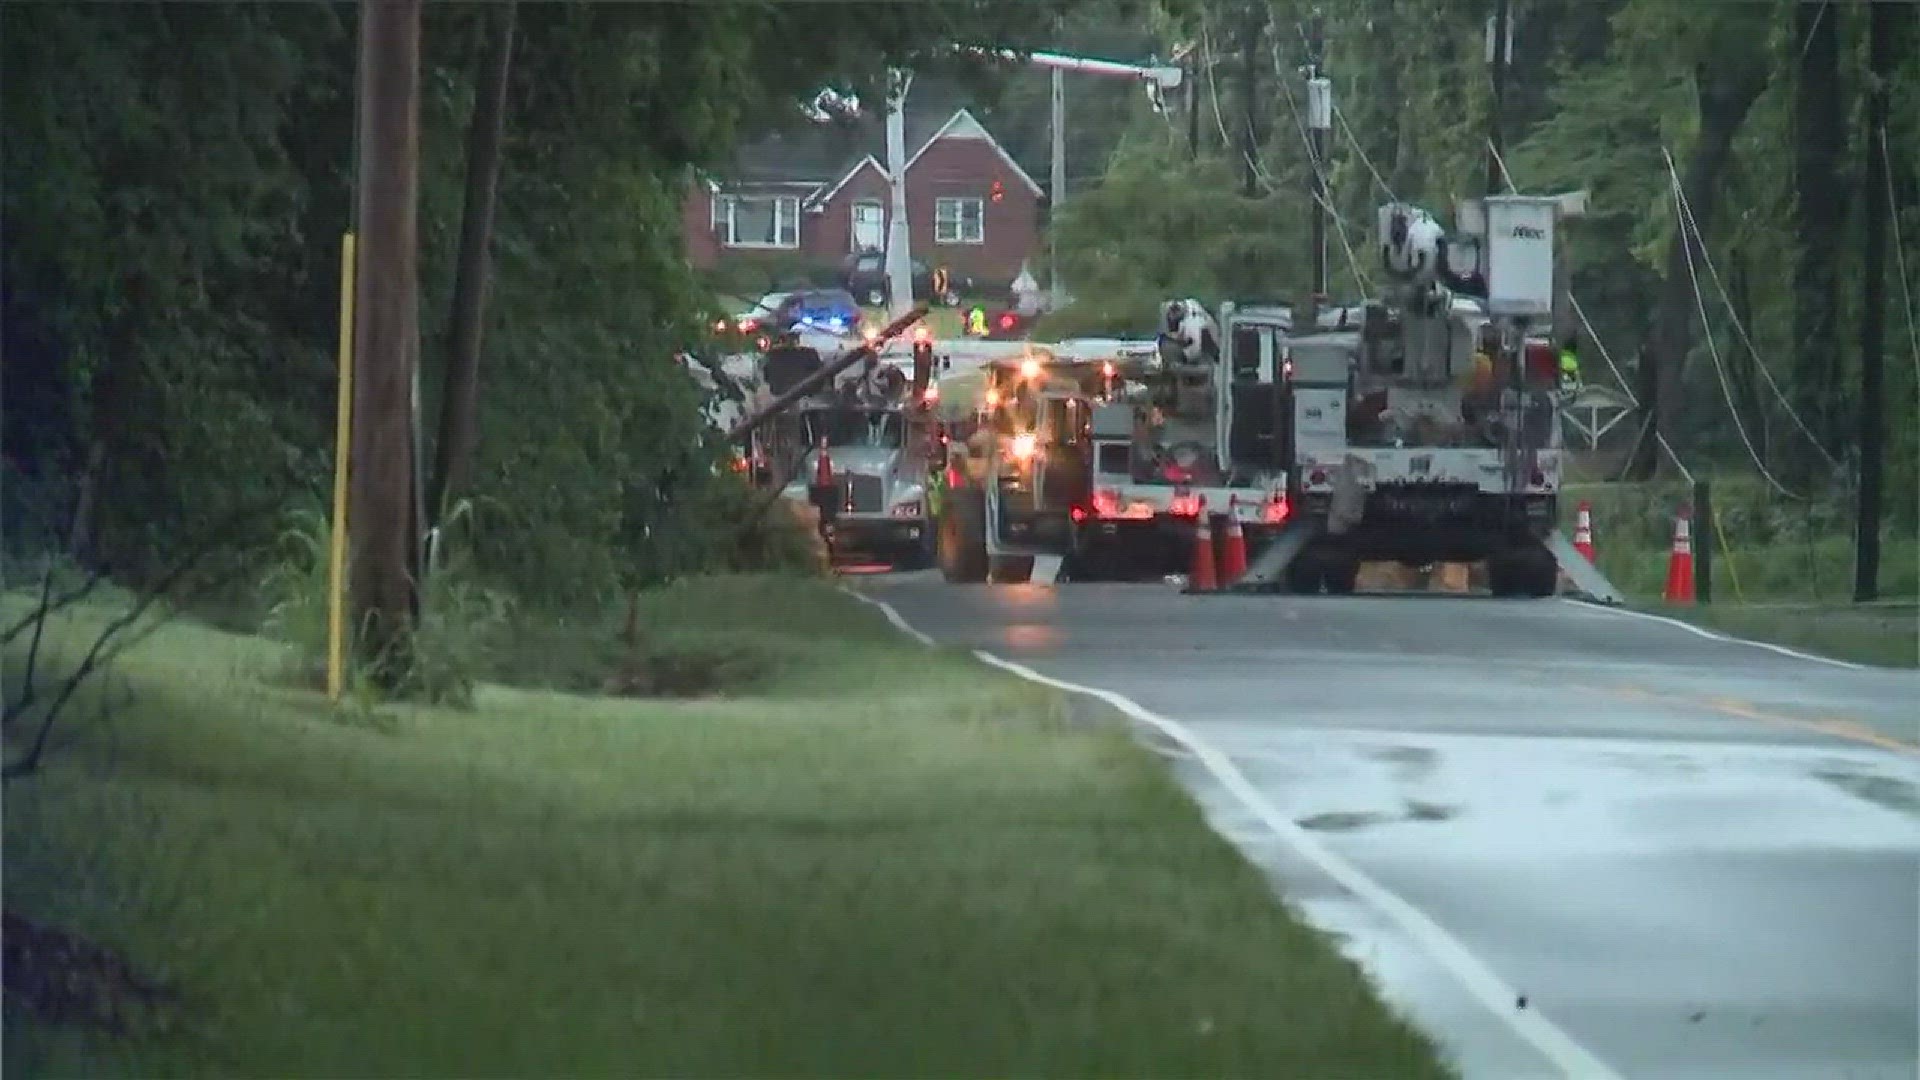 Heavy rains took down several trees across the Charlotte area overnight.